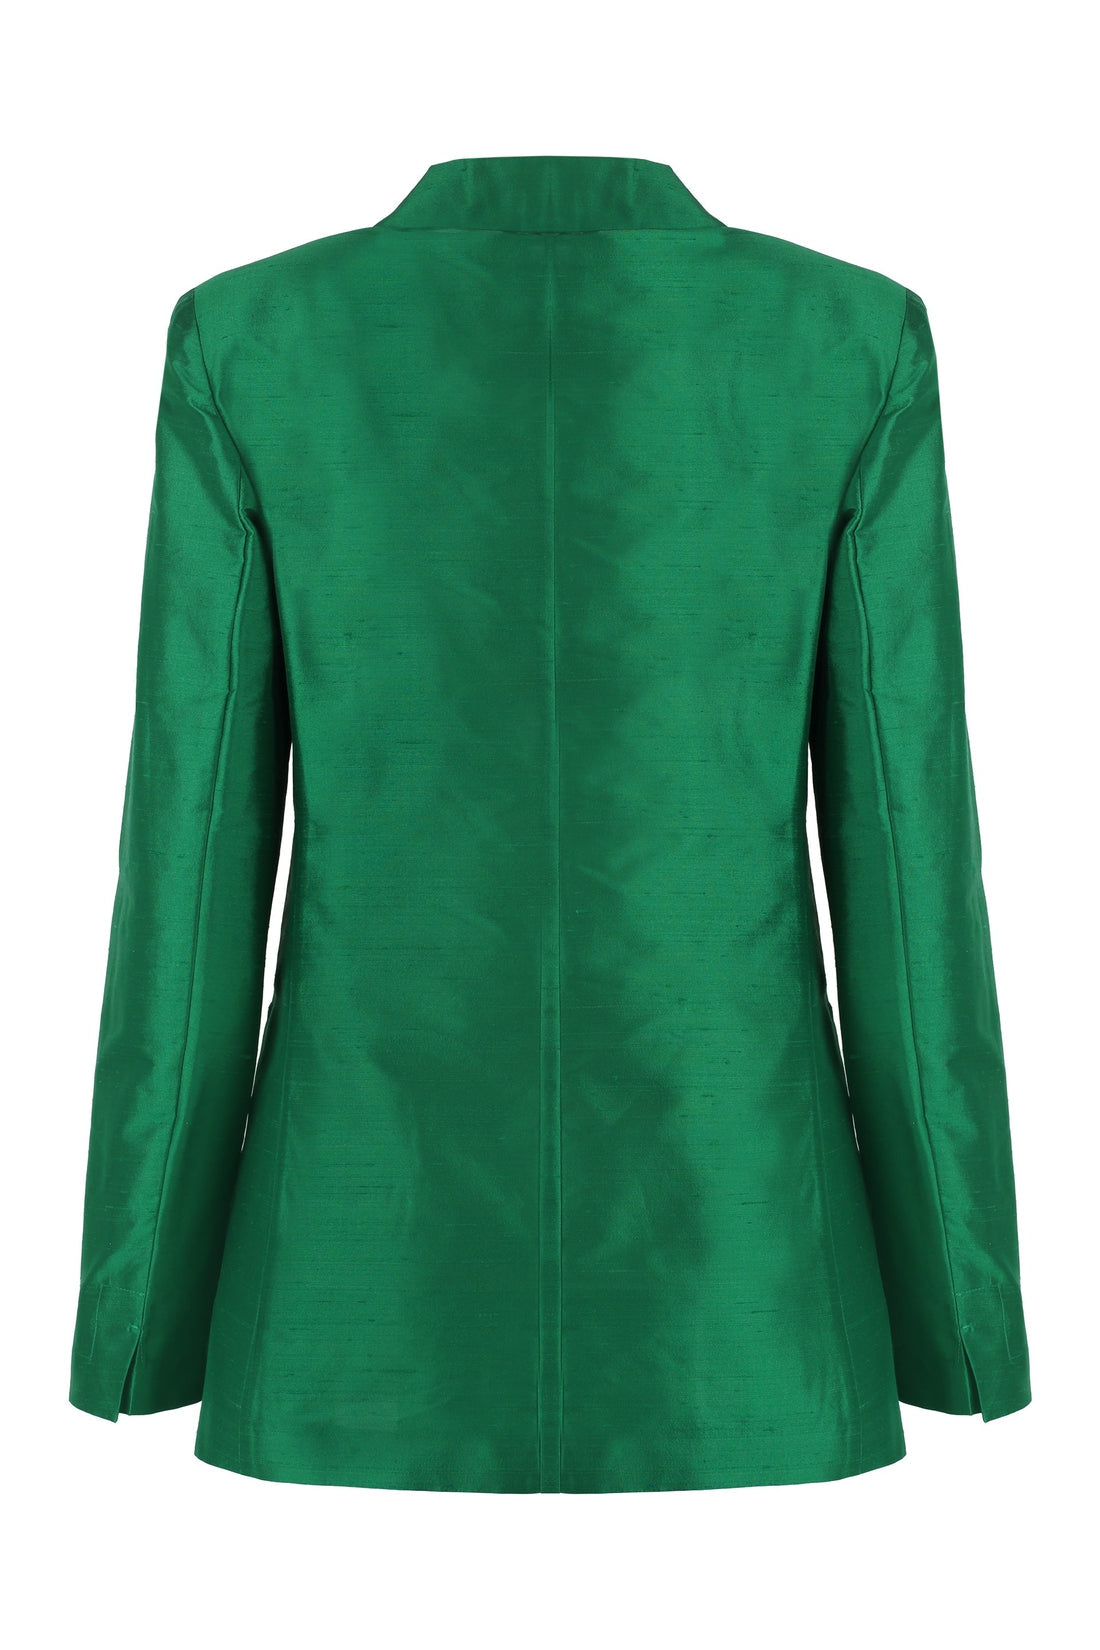 Max Mara Studio-OUTLET-SALE-Doroty single-breasted one button jacket-ARCHIVIST